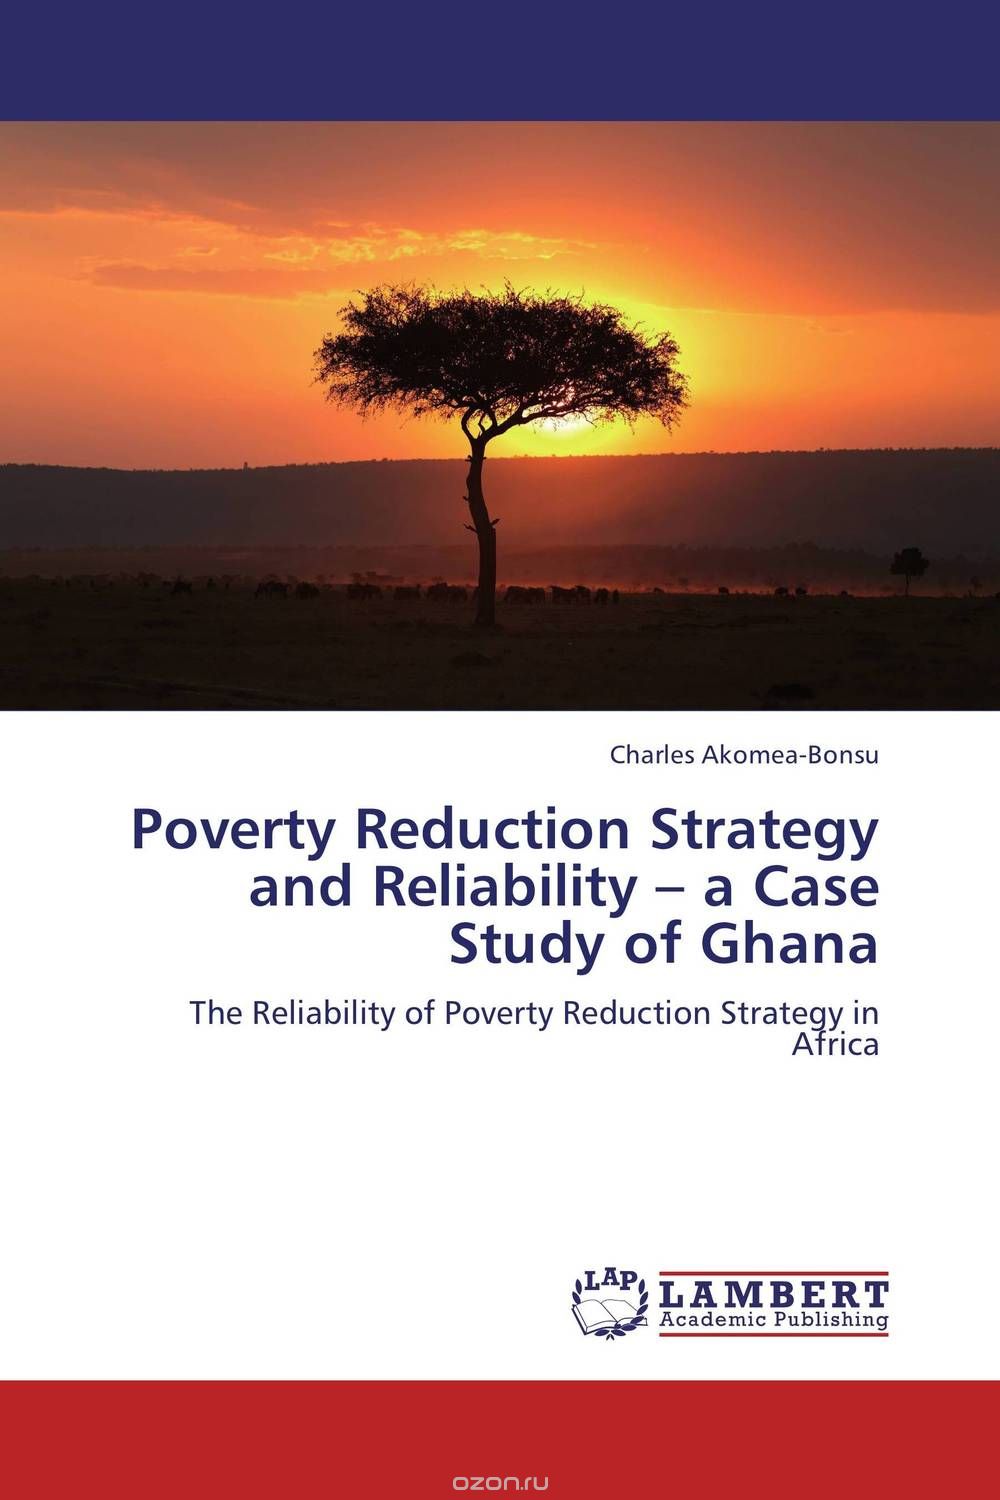 Скачать книгу "Poverty Reduction Strategy and Reliability – a Case Study of Ghana"